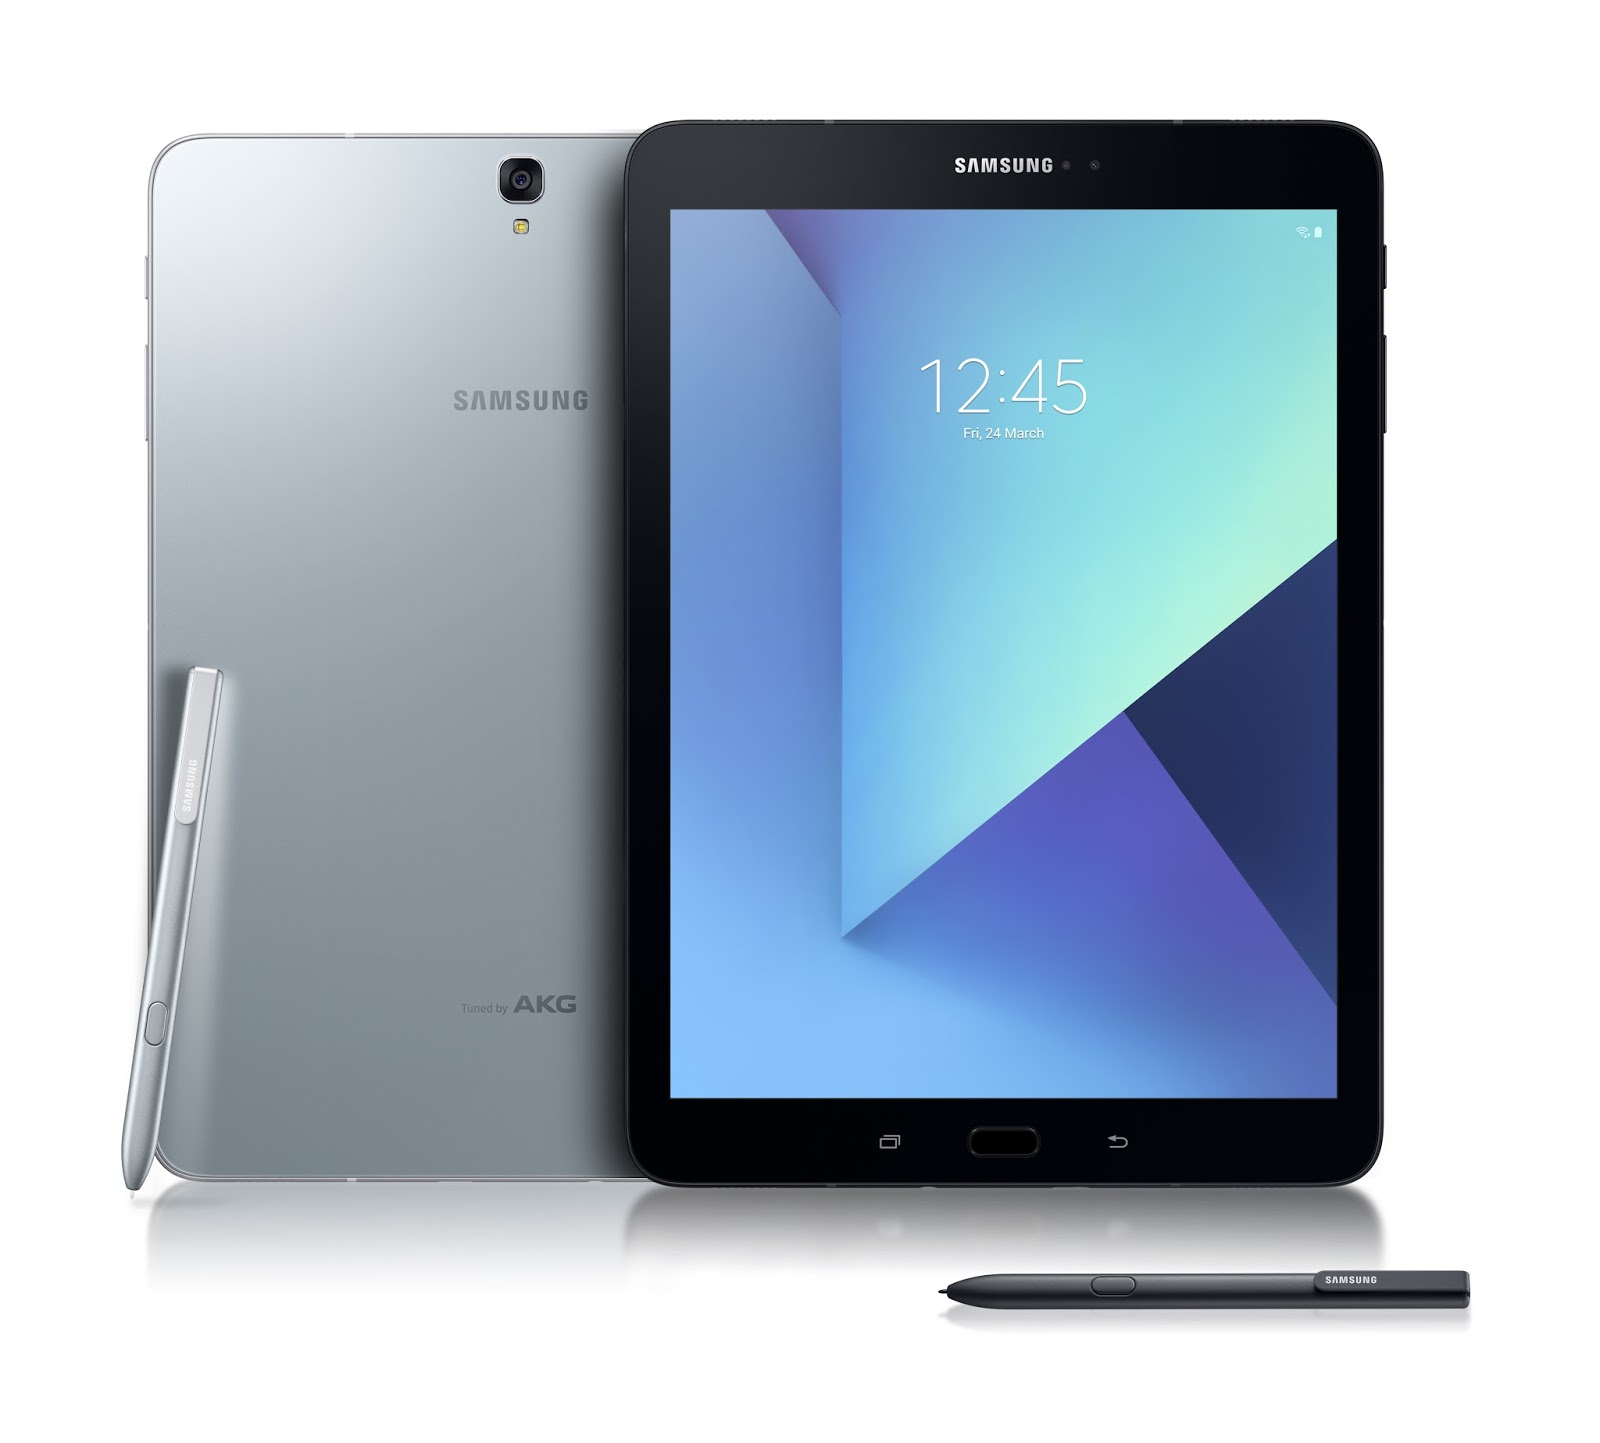 Samsung Galaxy Tab S3 now available